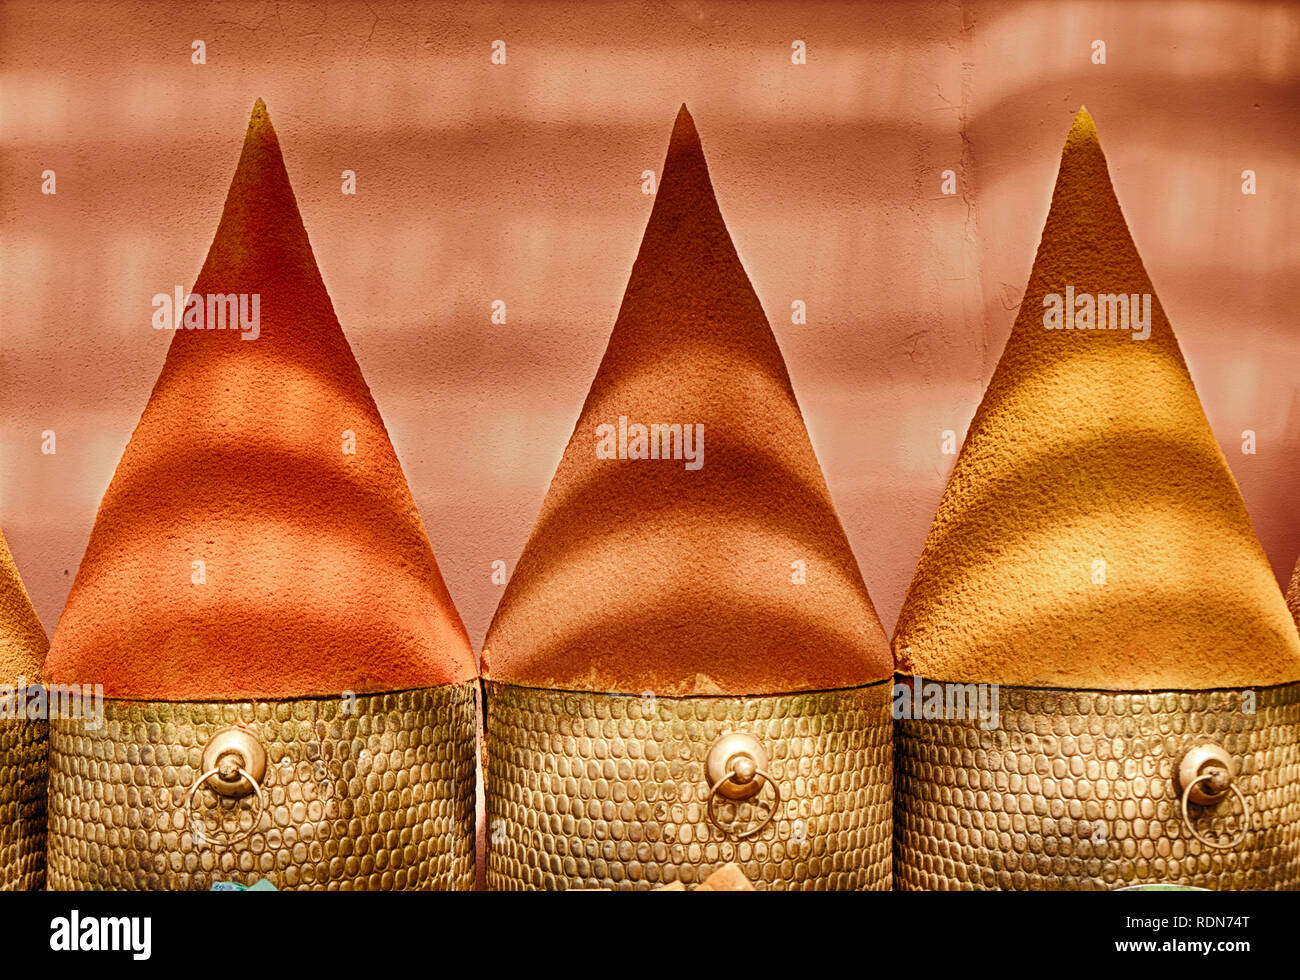 Spices are built into large cones for display in the spice markets in the Marrakesh souk in Morocco. Bands of light come from the ceiling covering. Stock Photo